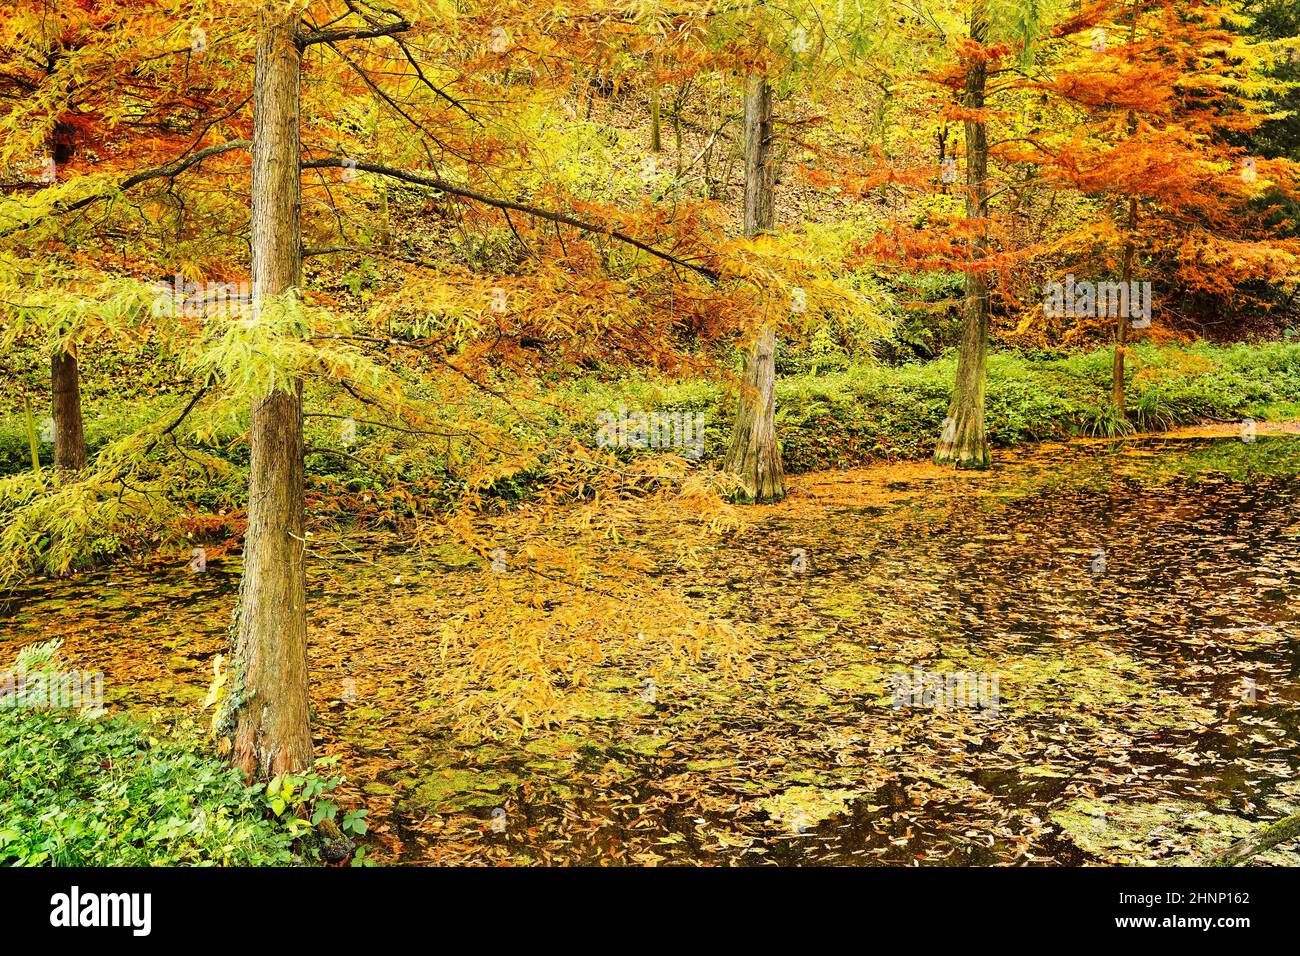 Swamp cypresses (Taxodium distichum) in autumn colors in a pond. Exotic forest in Weinheim, Baden-Wurttemberg, Germany. Stock Photo